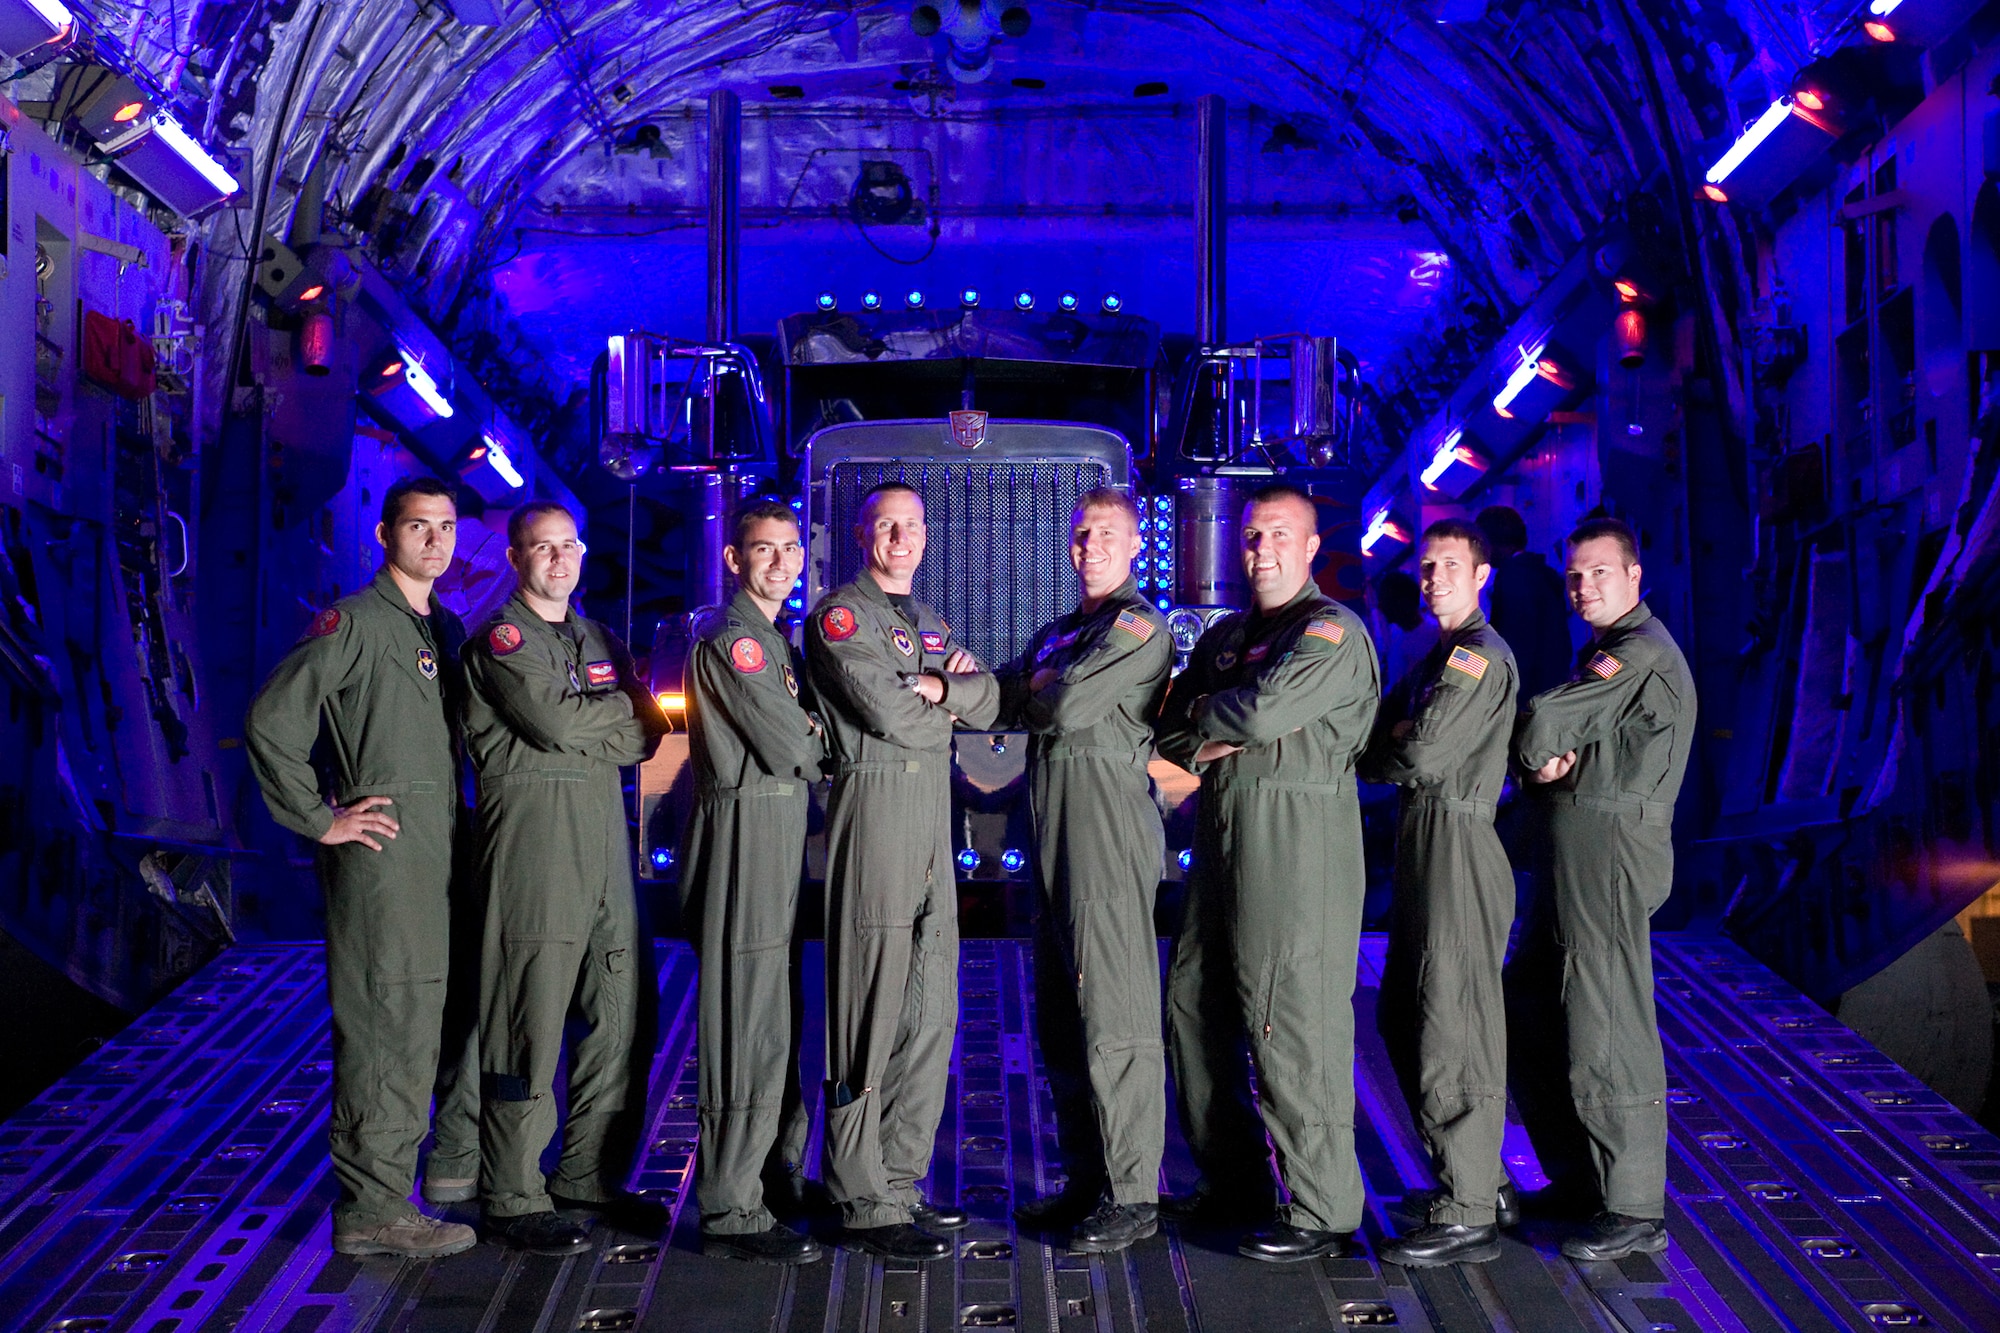 ALTUS AIR FORCE BASE, Okla. -- Aircrews from Altus stand in front of "Optimus Prime" during filming of "Transformers: Revenge of the Fallen." The Airmen and C-17 Globemaster III aircraft were featured in the film. (Courtesy photo, copyright 2009 Paramount Pictures)